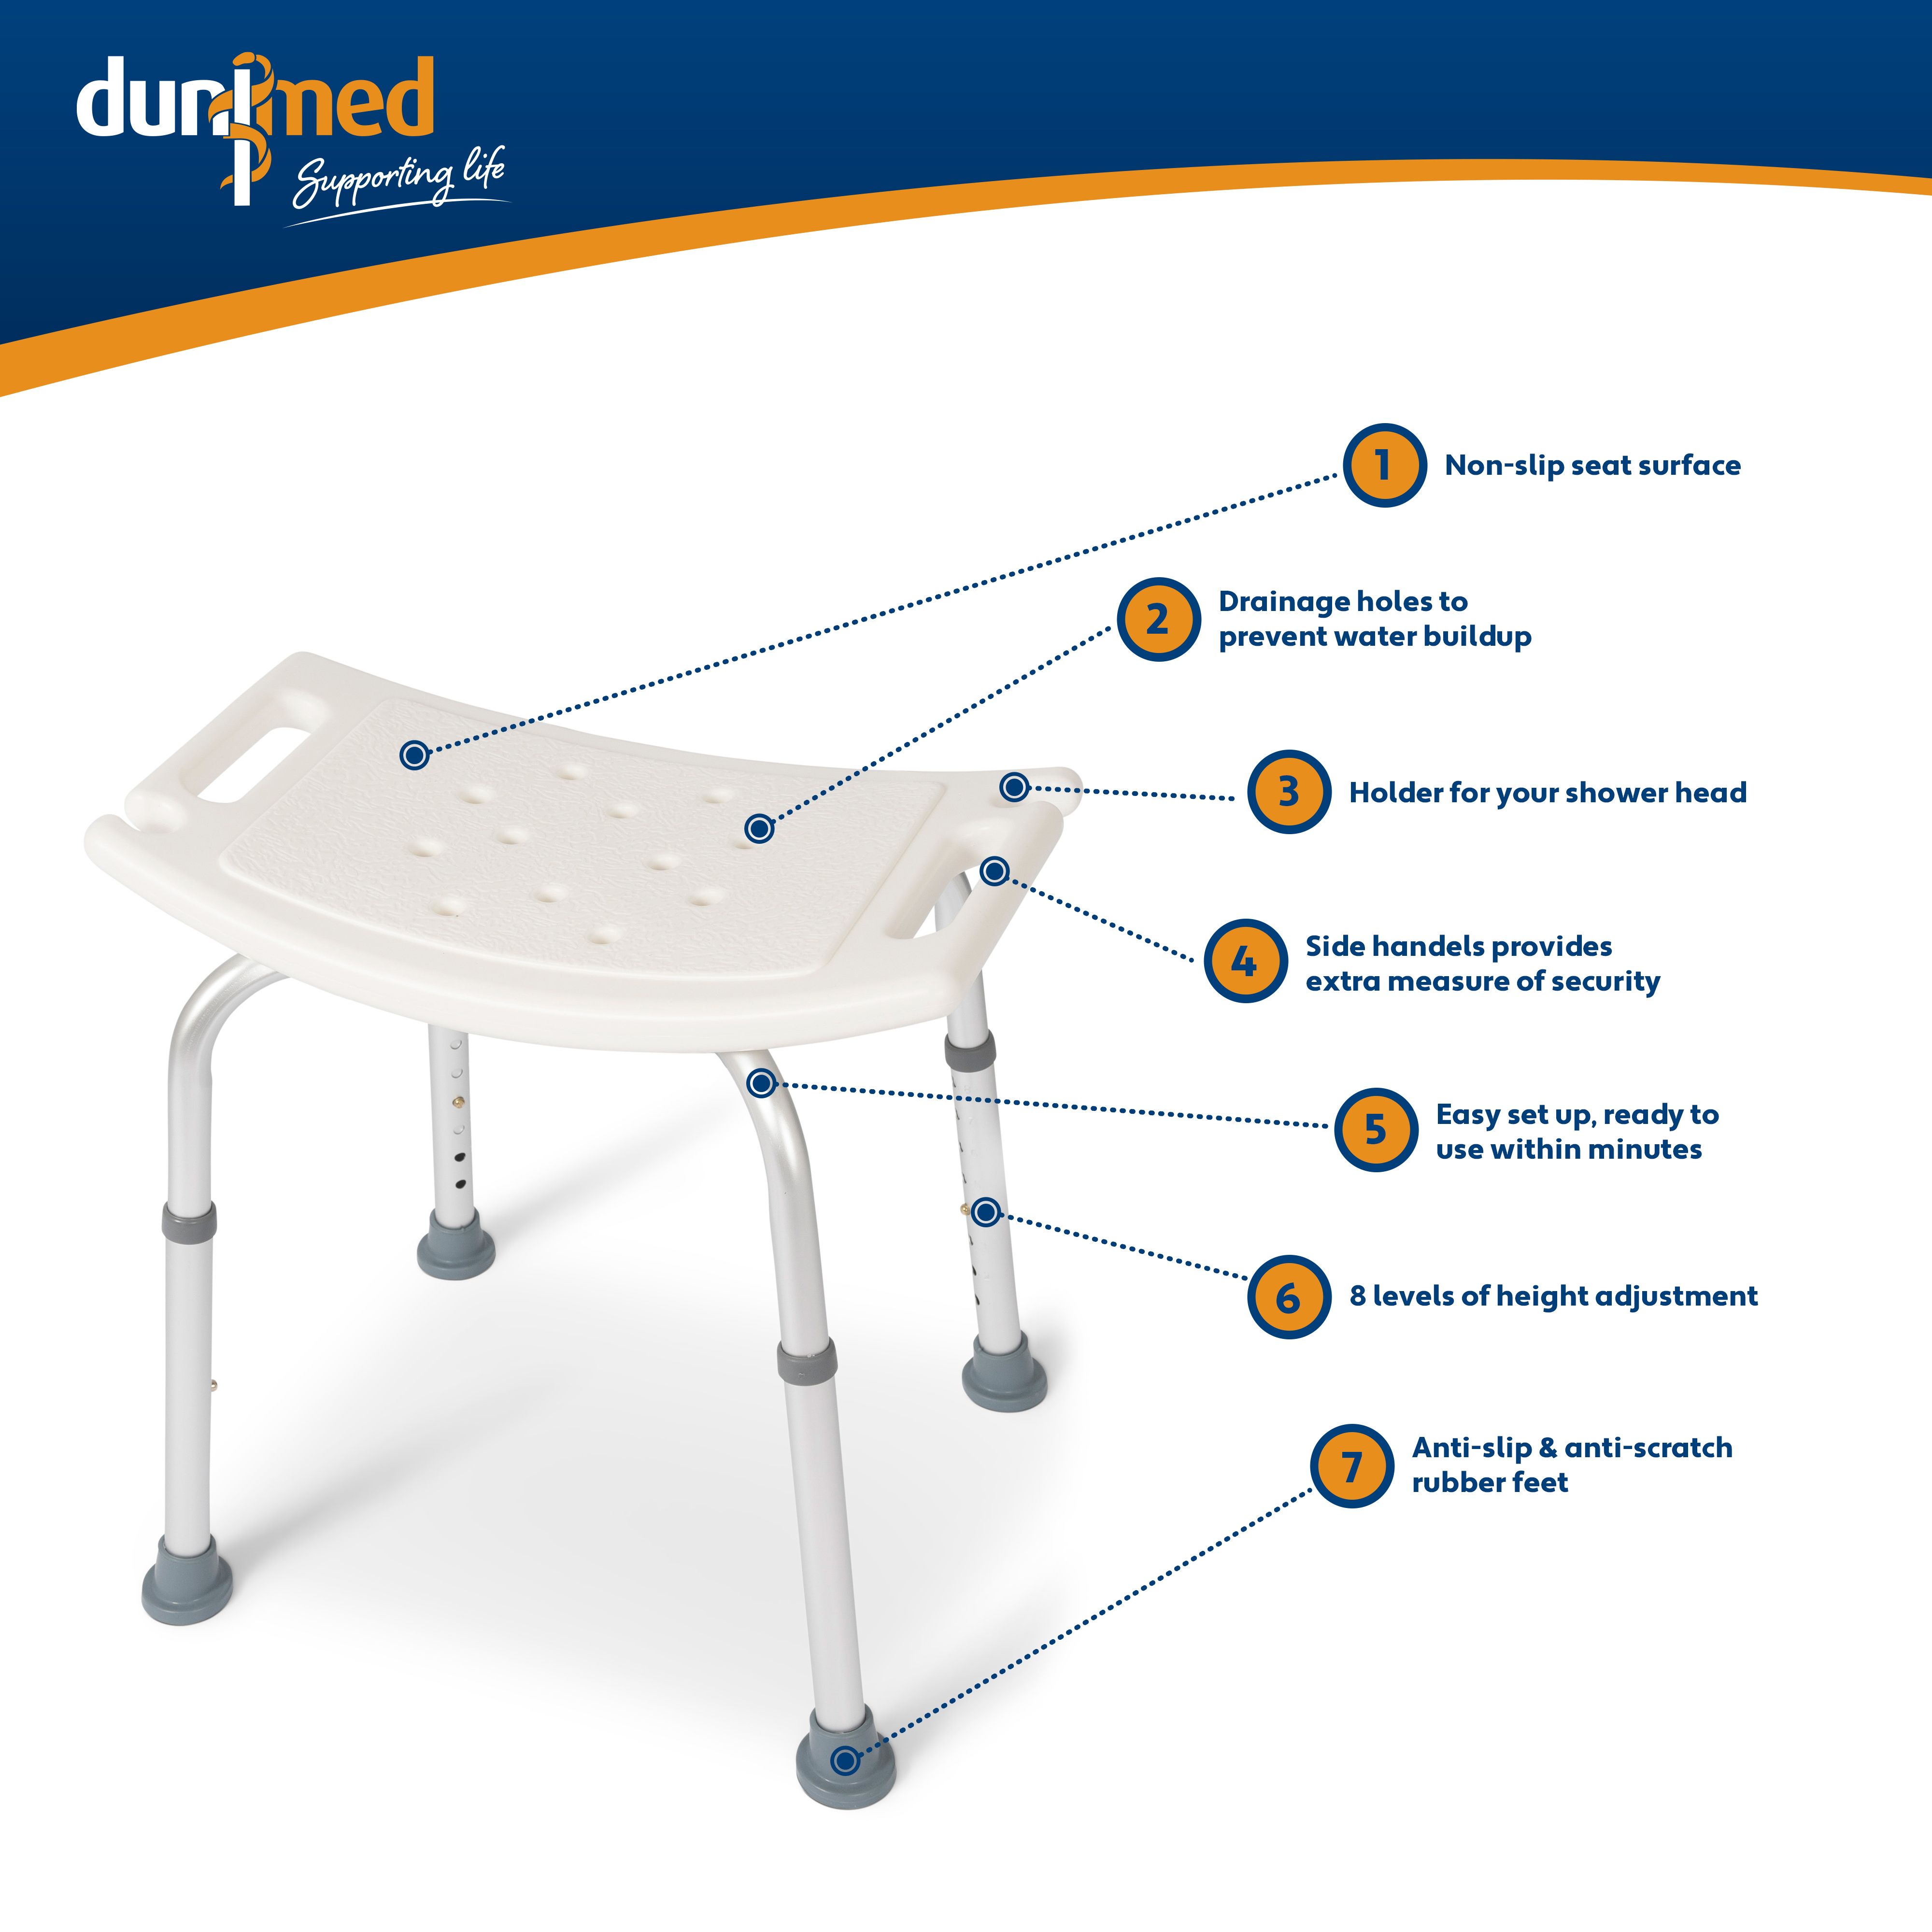 dunimed shower chair in height adjustable usp's